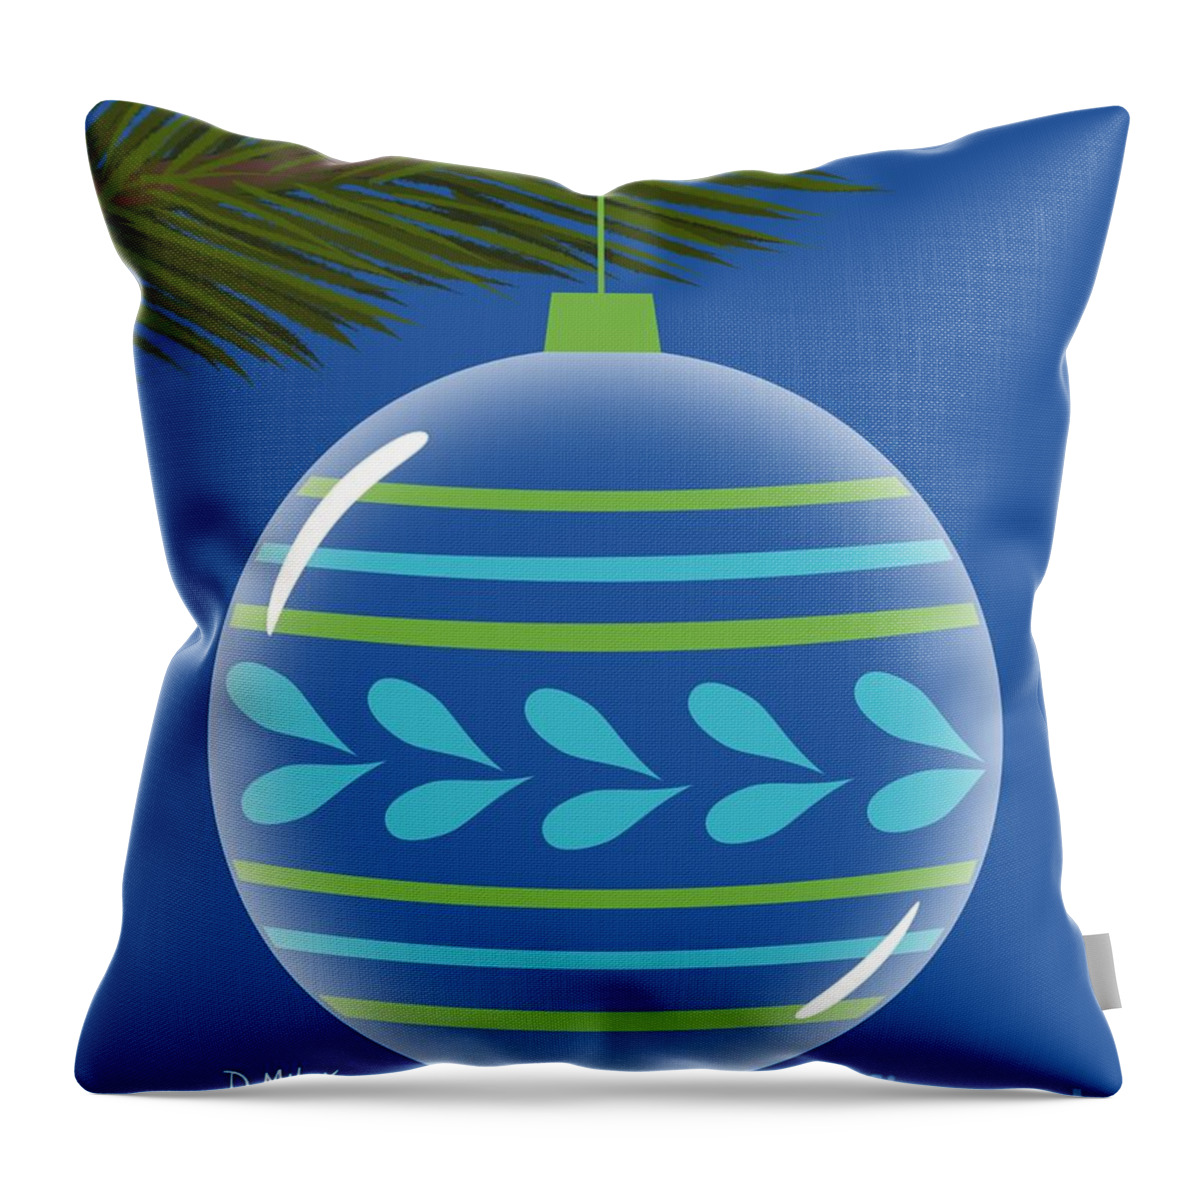  Throw Pillow featuring the digital art Christmas Ornament Blue and Green by Donna Mibus